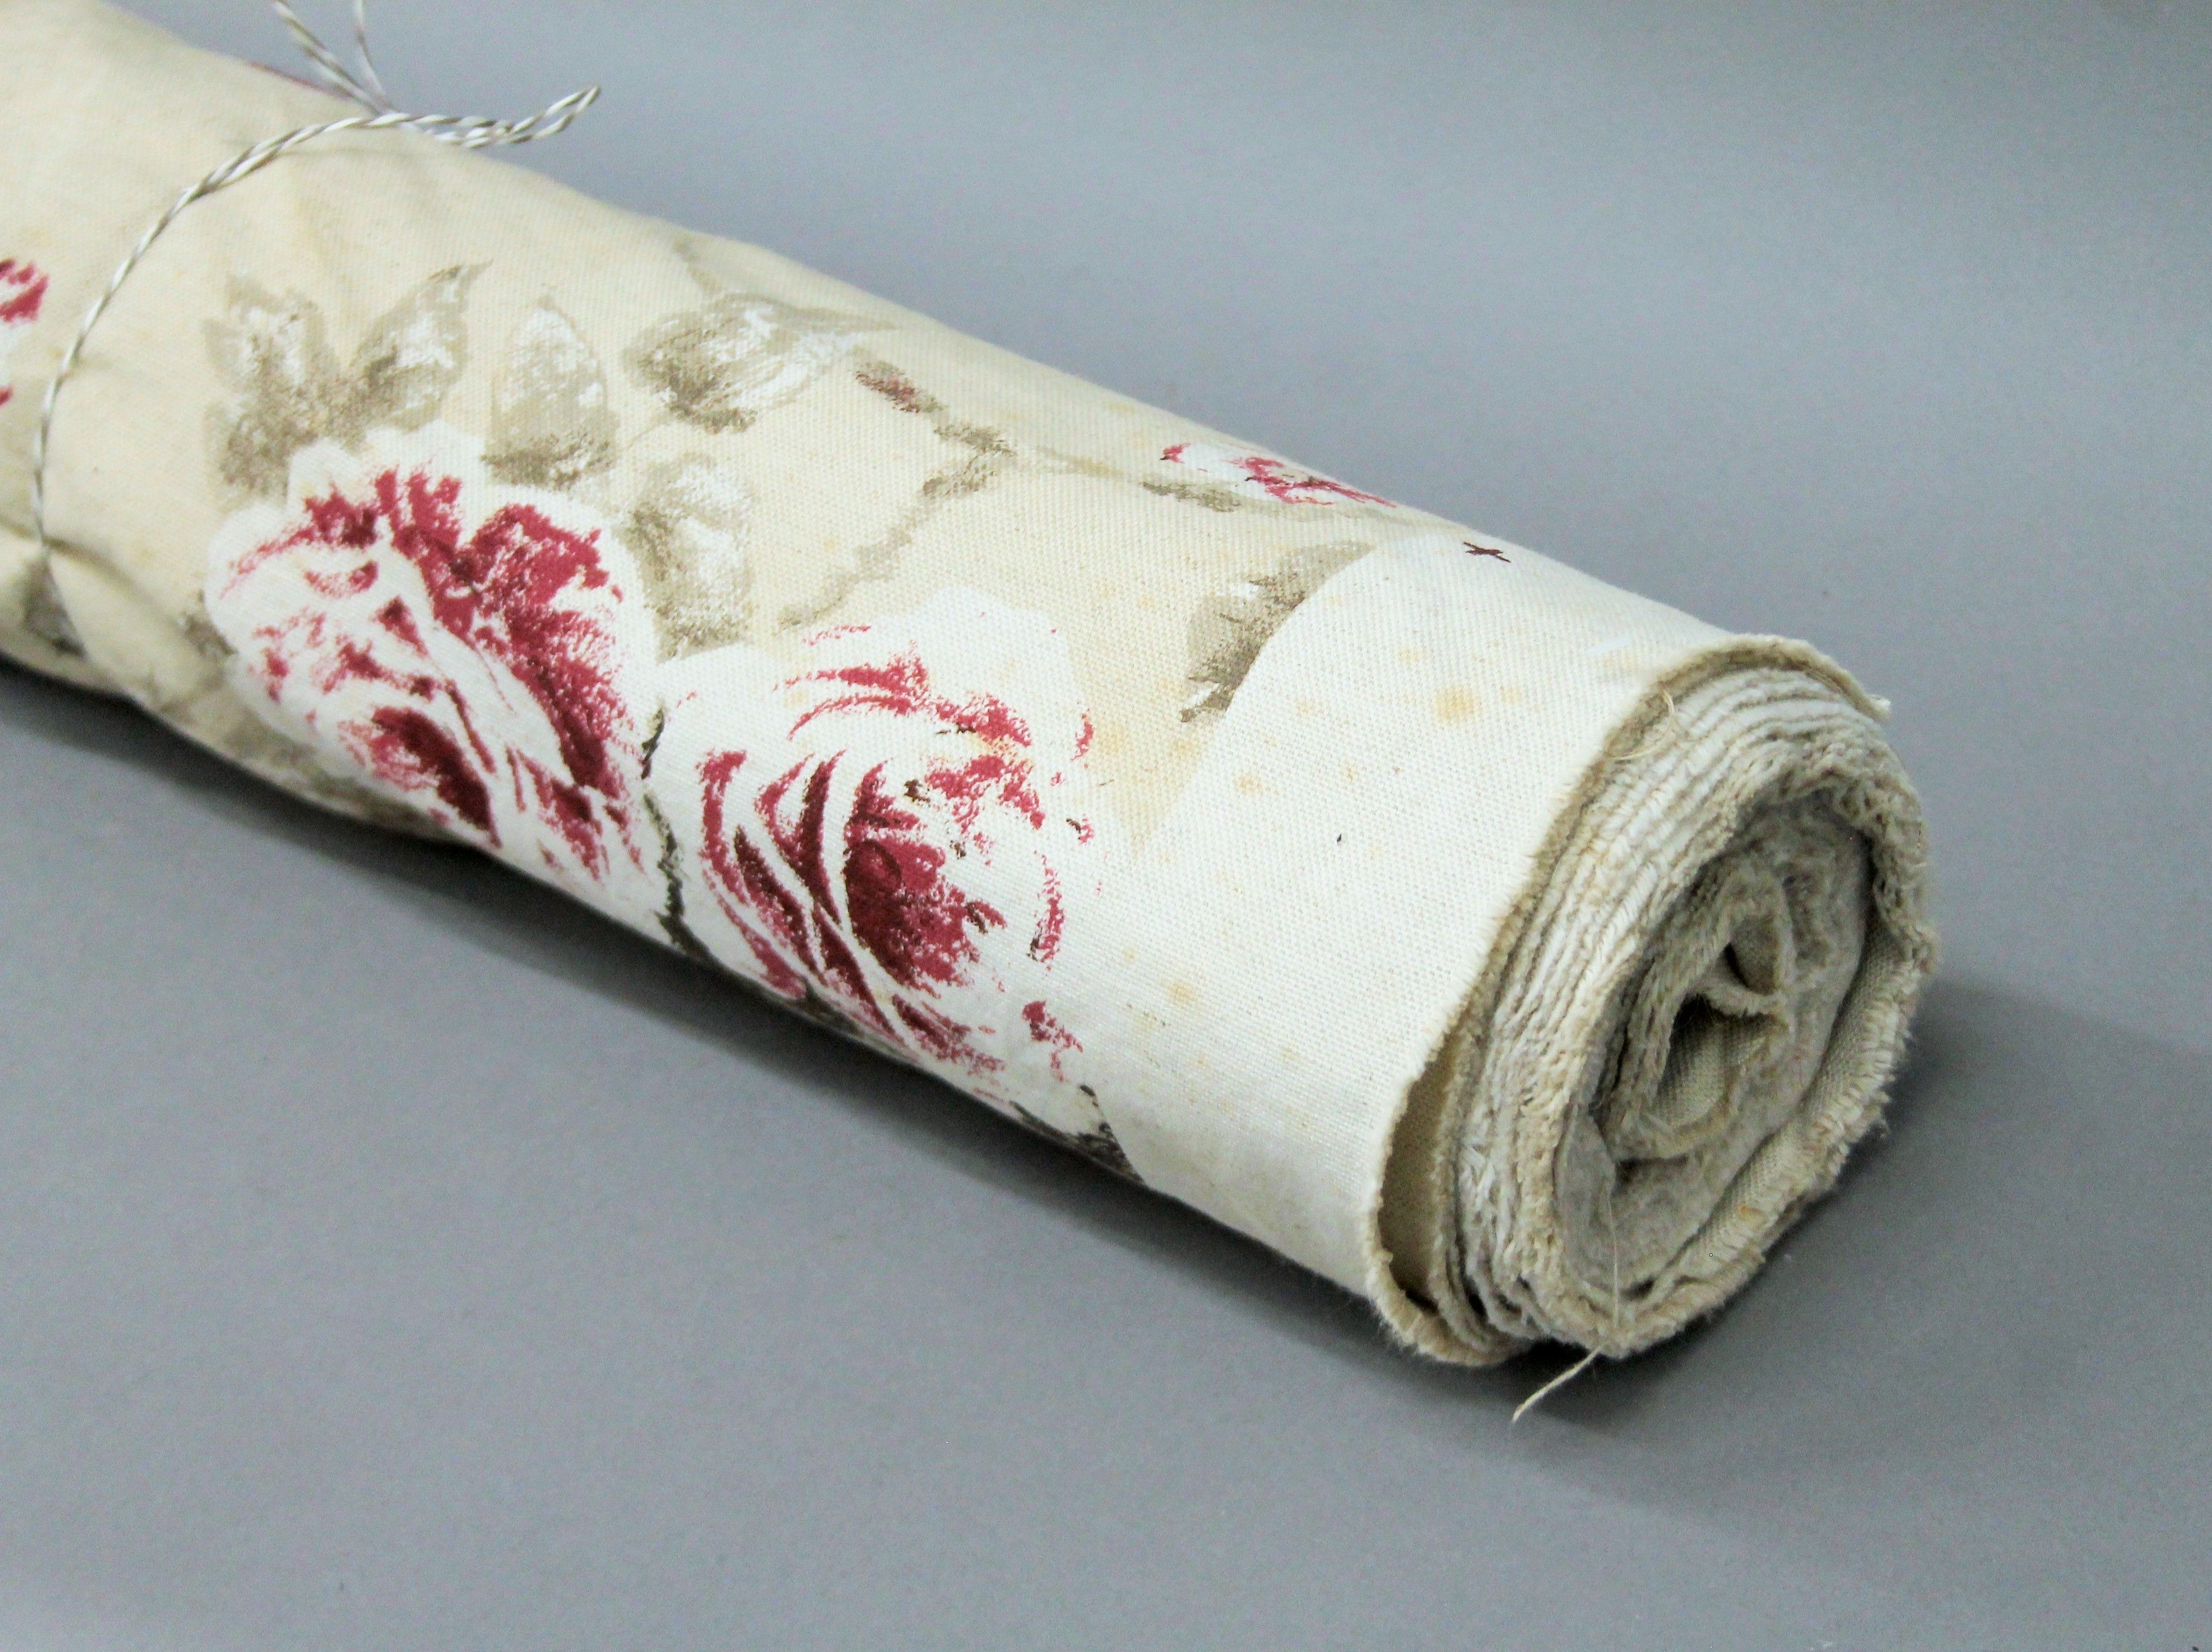 A roll of floral fabric. - Image 3 of 3